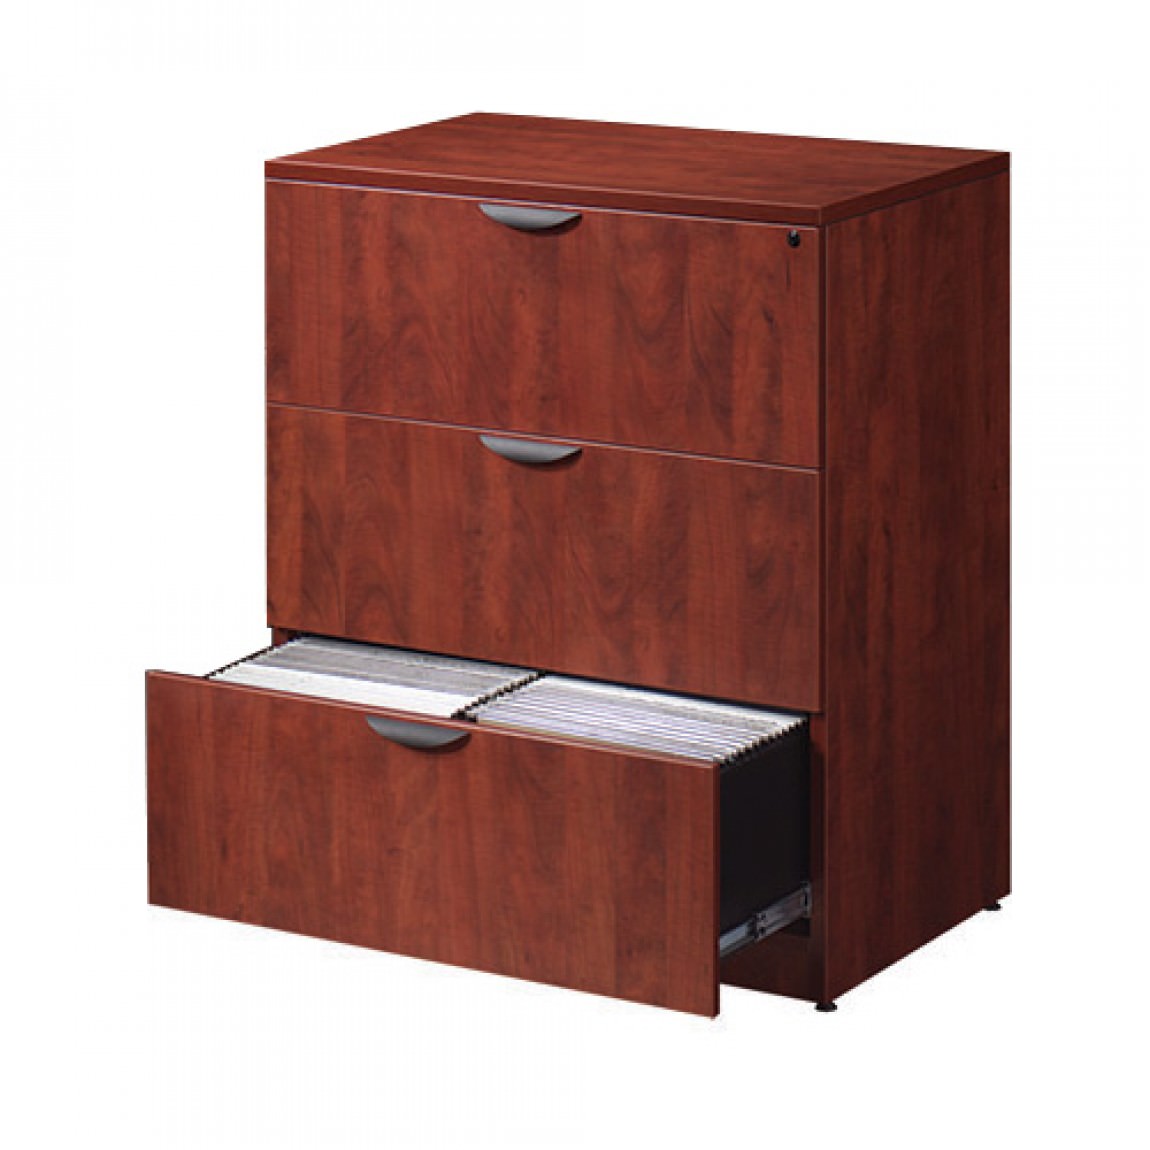 3915 3 Drawer Lateral Filing Cabinet By Harmony 1 